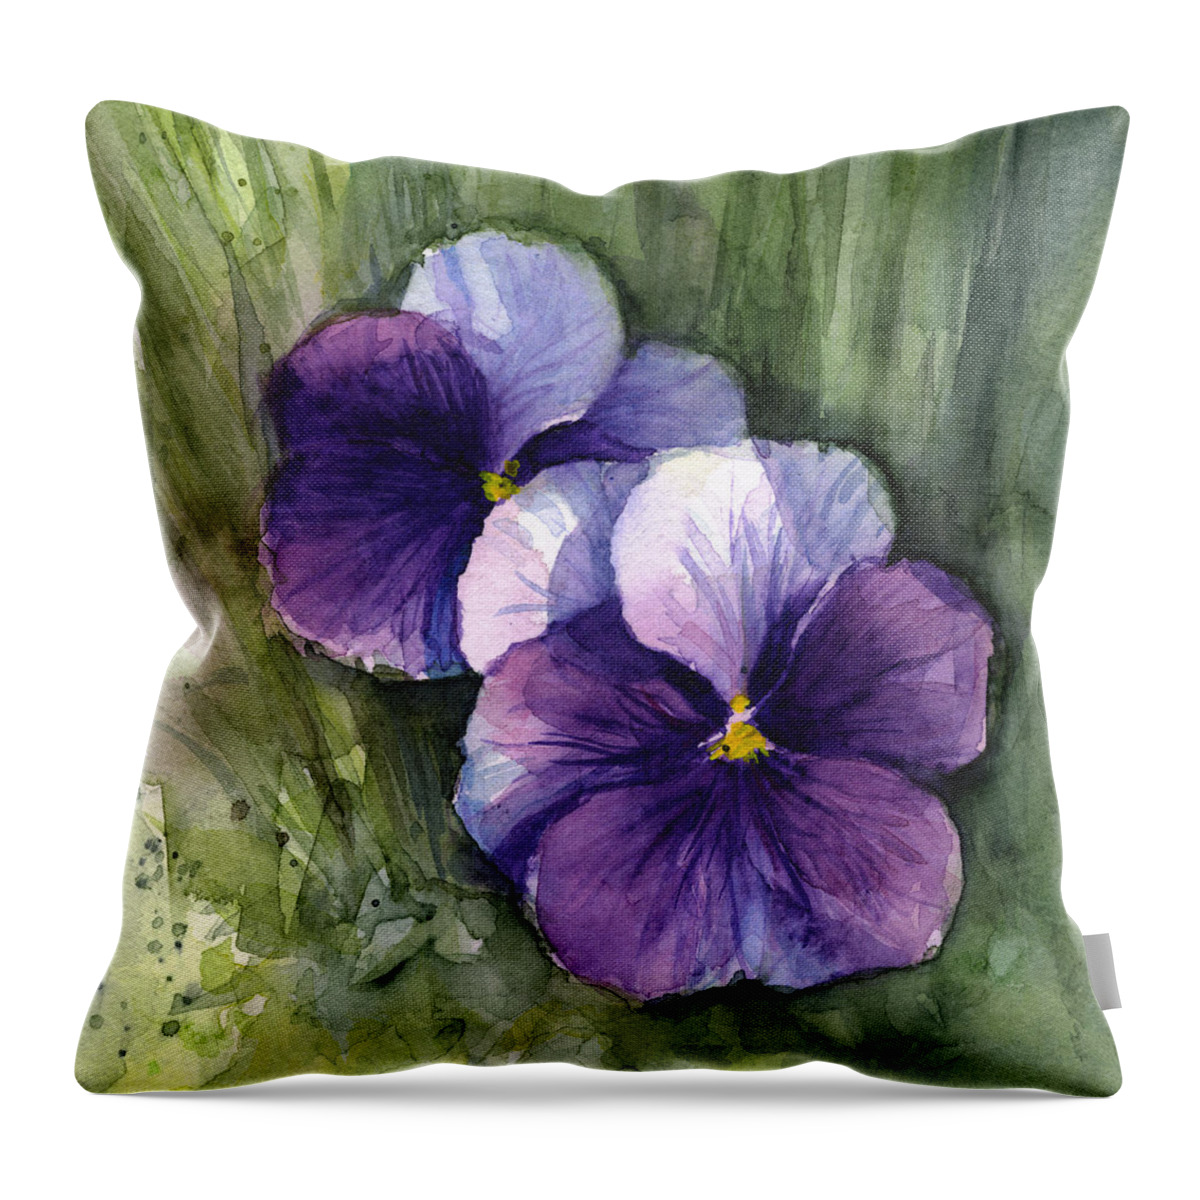 Pansy Throw Pillow featuring the painting Purple Pansies Watercolor by Olga Shvartsur